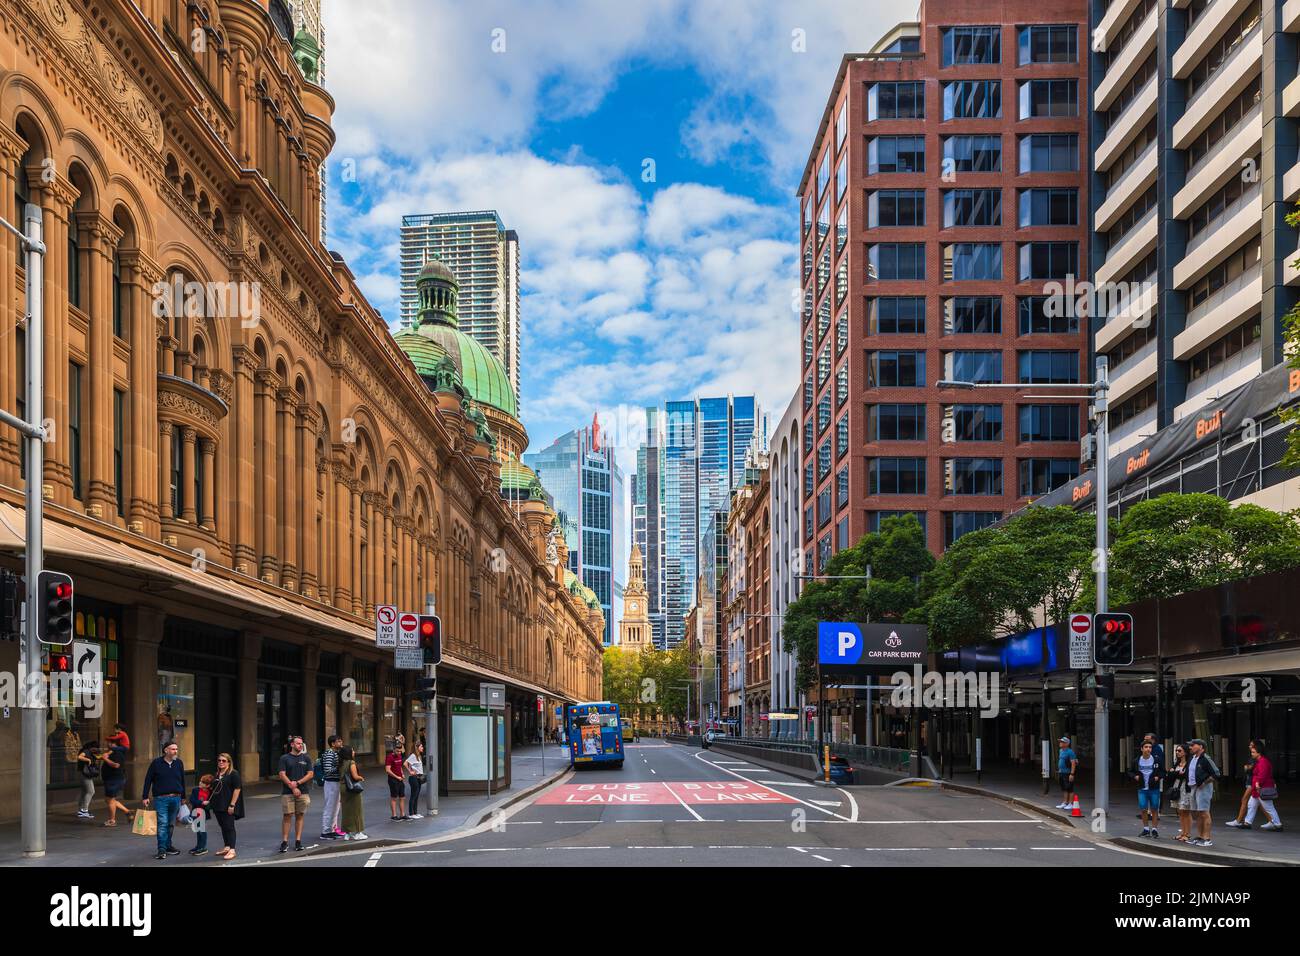 Sydney, Australia - April 16, 2022: York street viewed towards South with the Sydney Queen Victoria Building on the left and modern skyscrapers can be Stock Photo